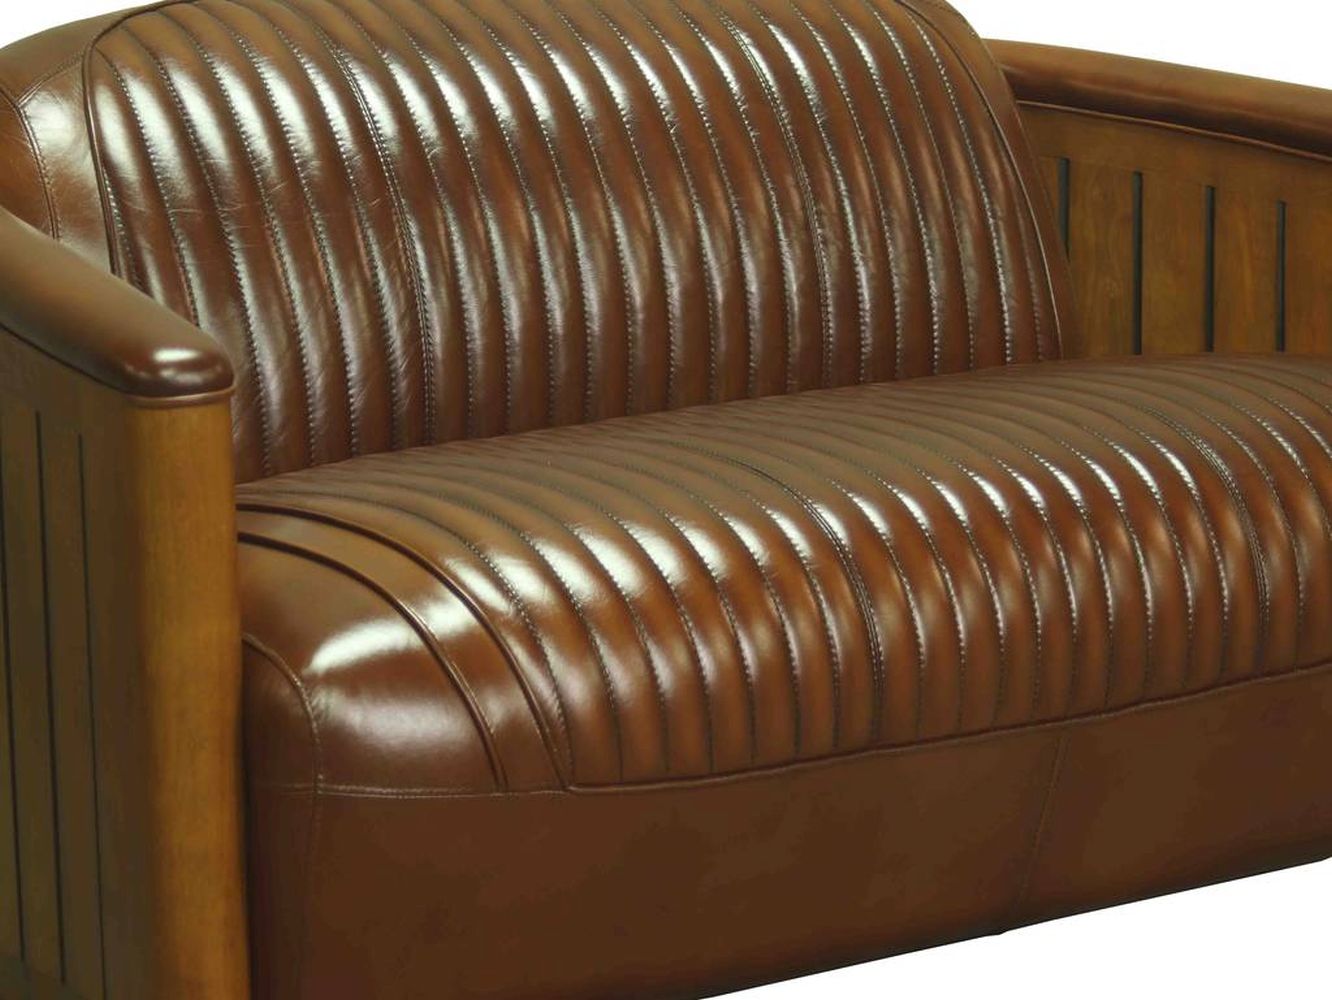 ART DECO STYLE MAHOGANY & HIDE UPHOLSTERED SETTEE - Image 3 of 3